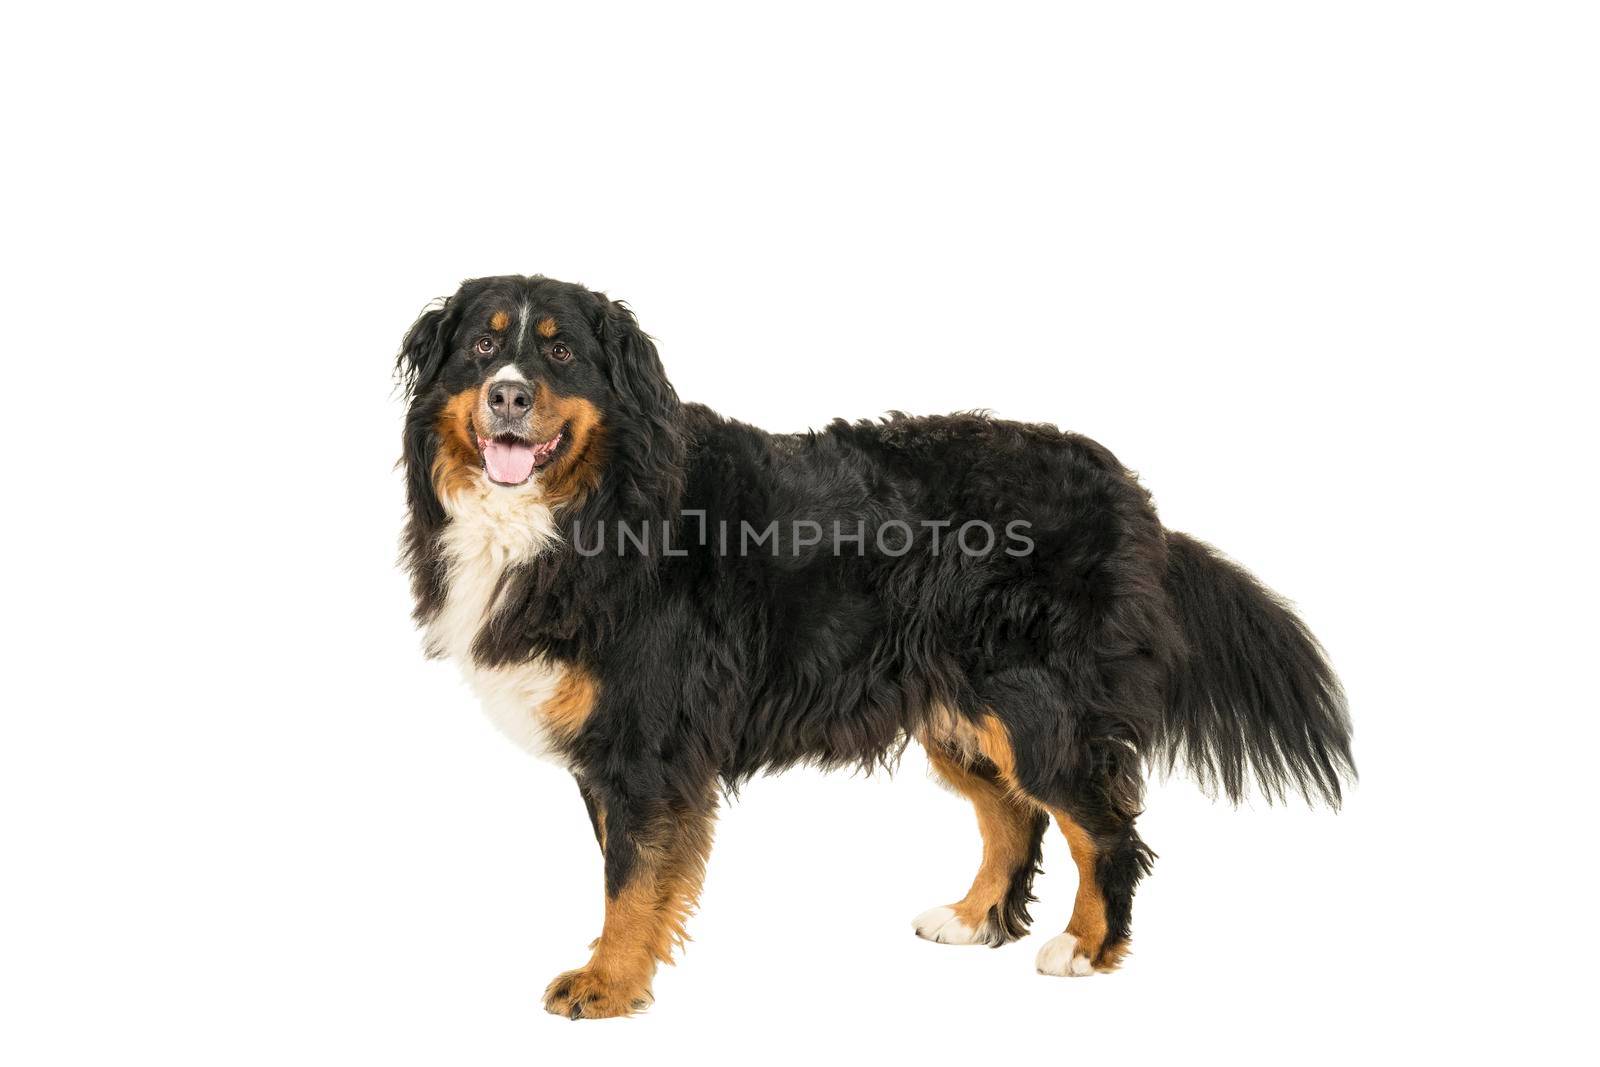 A Berner Sennen Mountain dog standing sideways looking up isolated on a white background